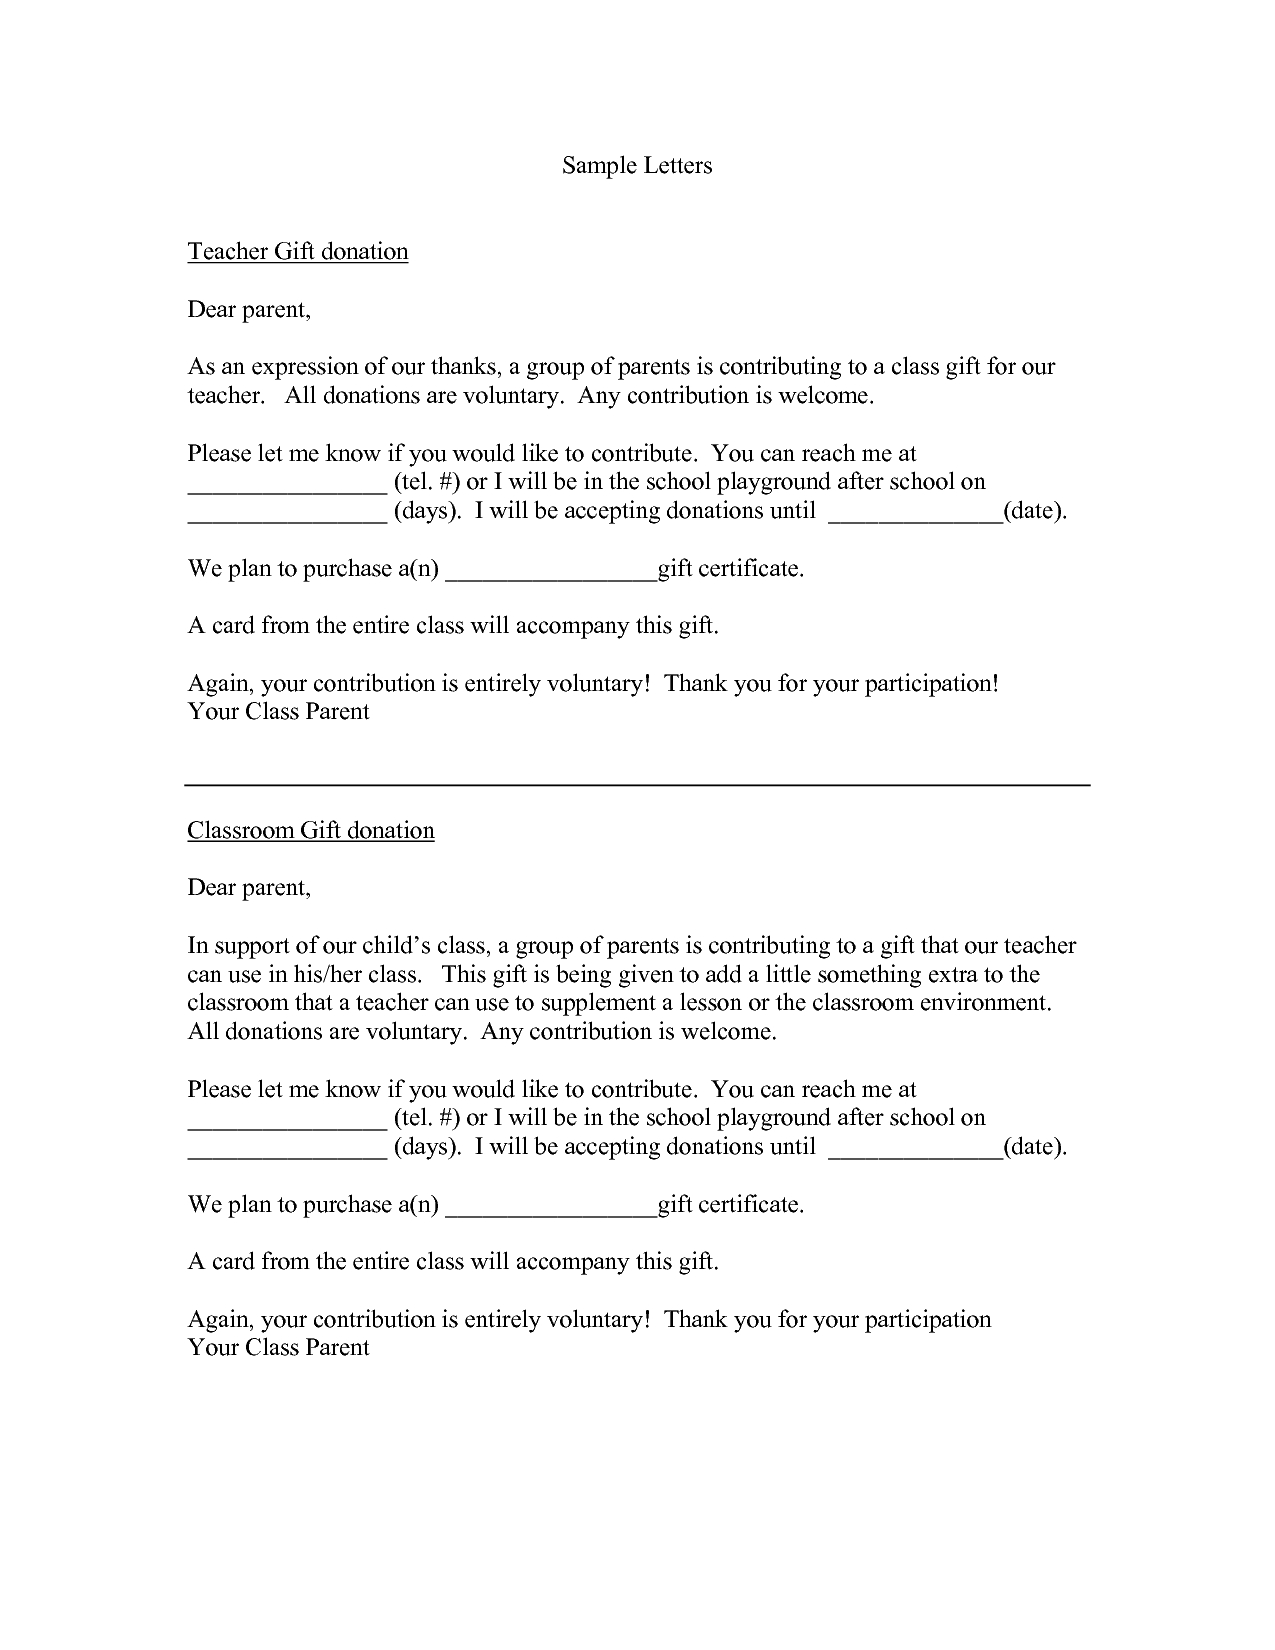 Gifting Letter Template - How to Write A Gift Letter Gallery Letter format formal Sample